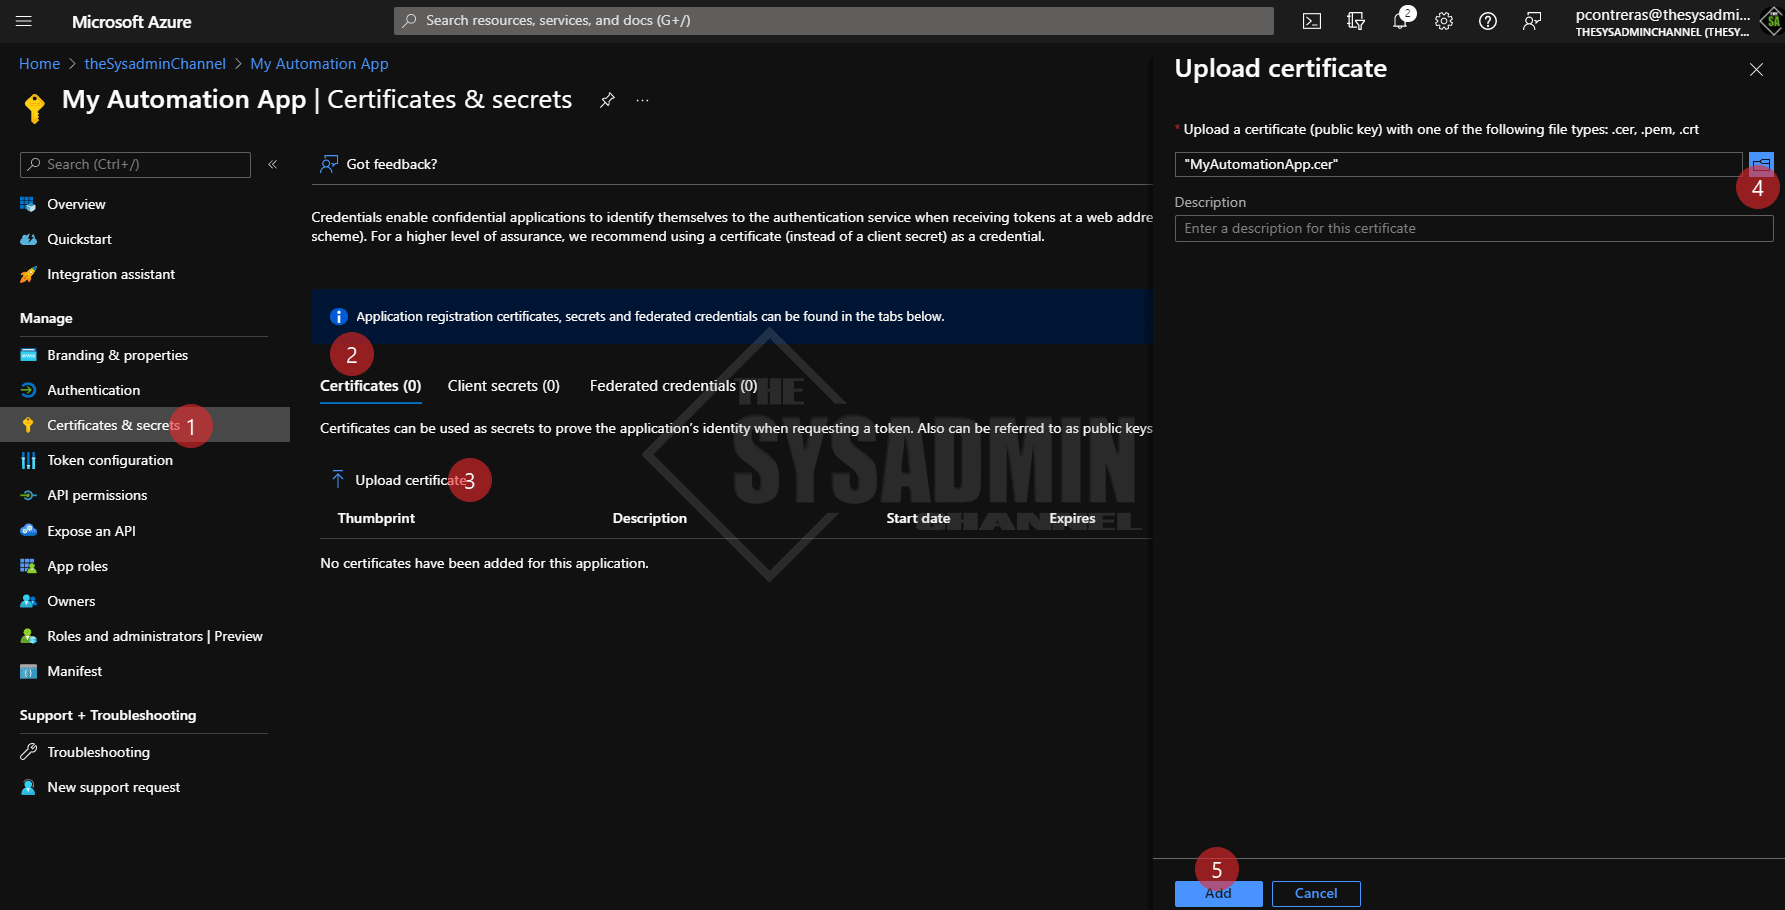 Upload Certificate to Azure AD